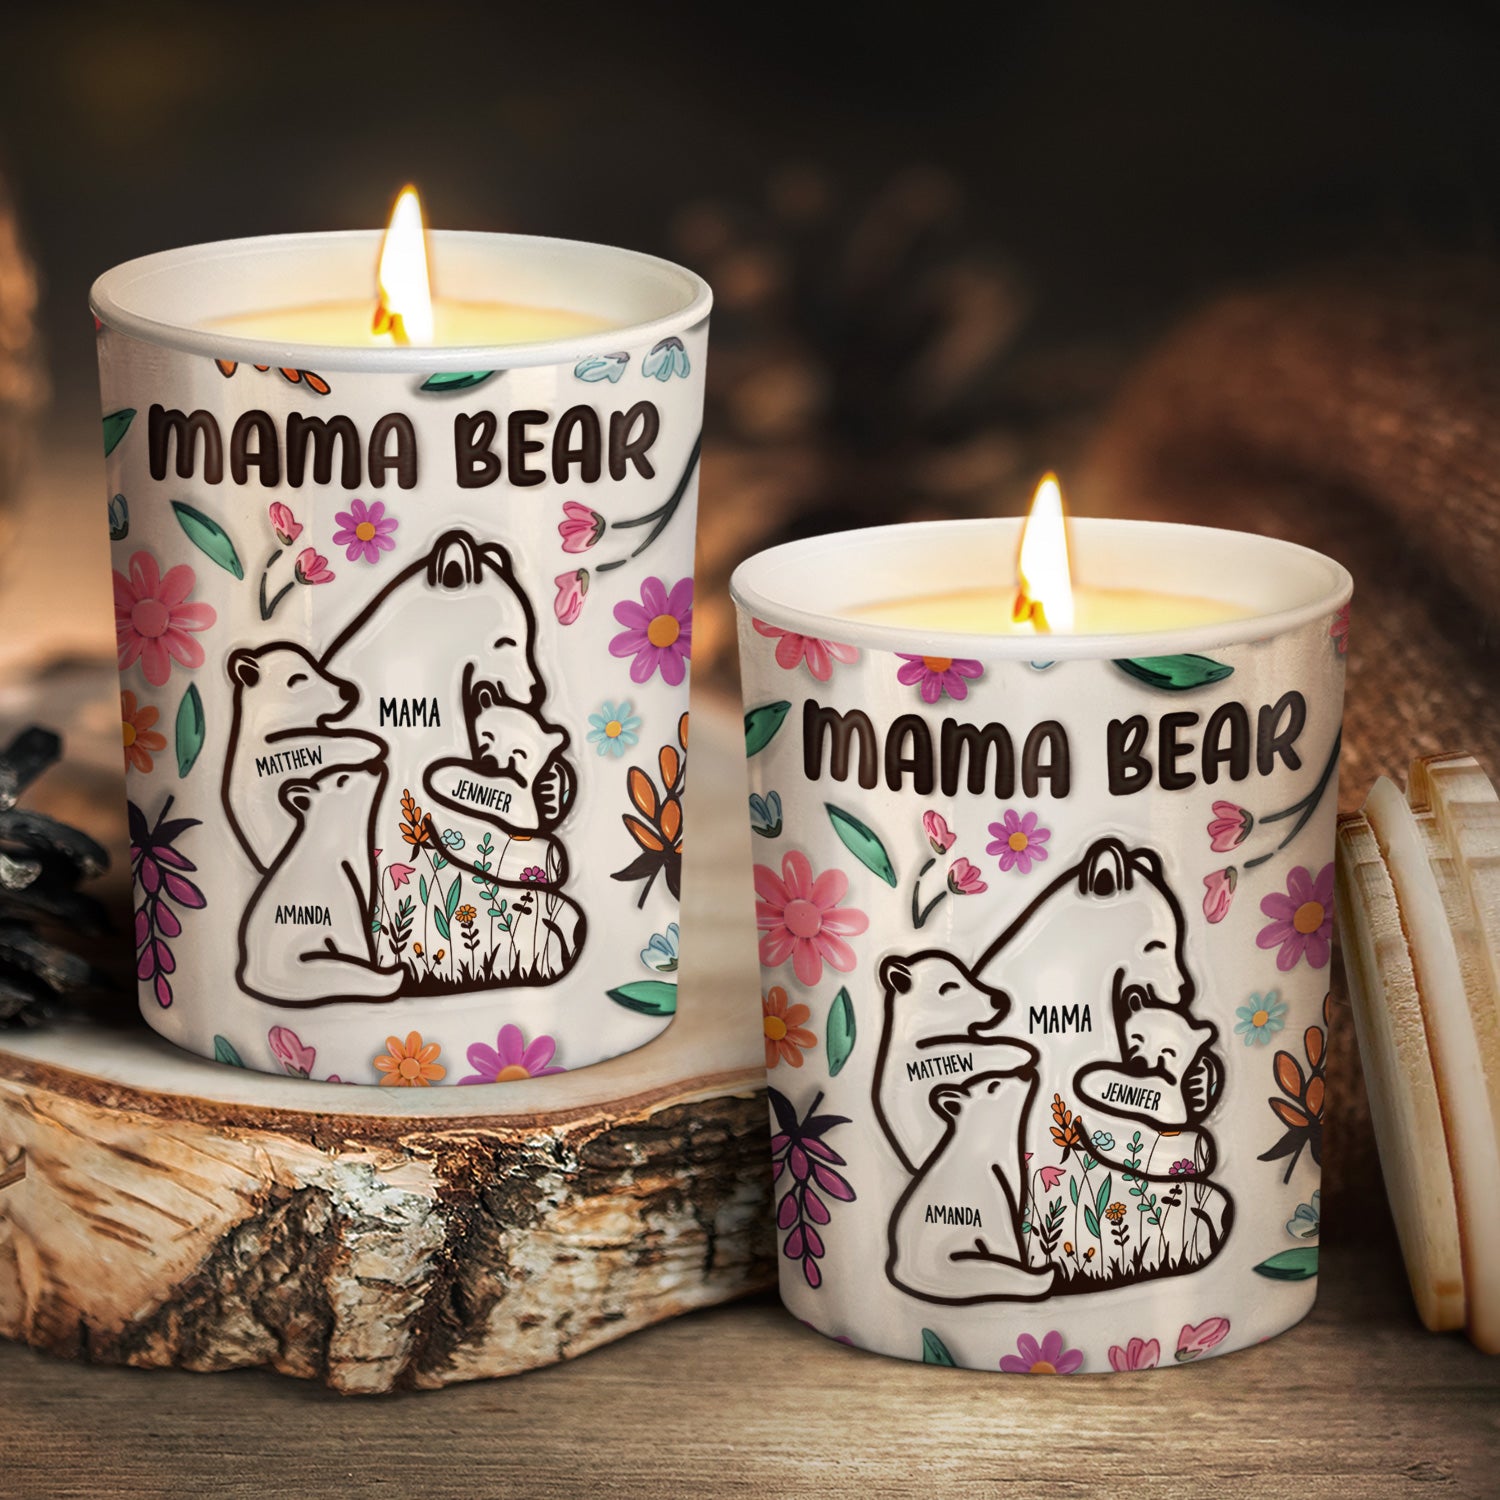 Mama Bear Floral Style - Birthday, Loving Gift For Mom, Mother, Grandma, Grandmother - 3D Inflated Effect Printed Candle, Personalized Scented Candle With Wooden Lid